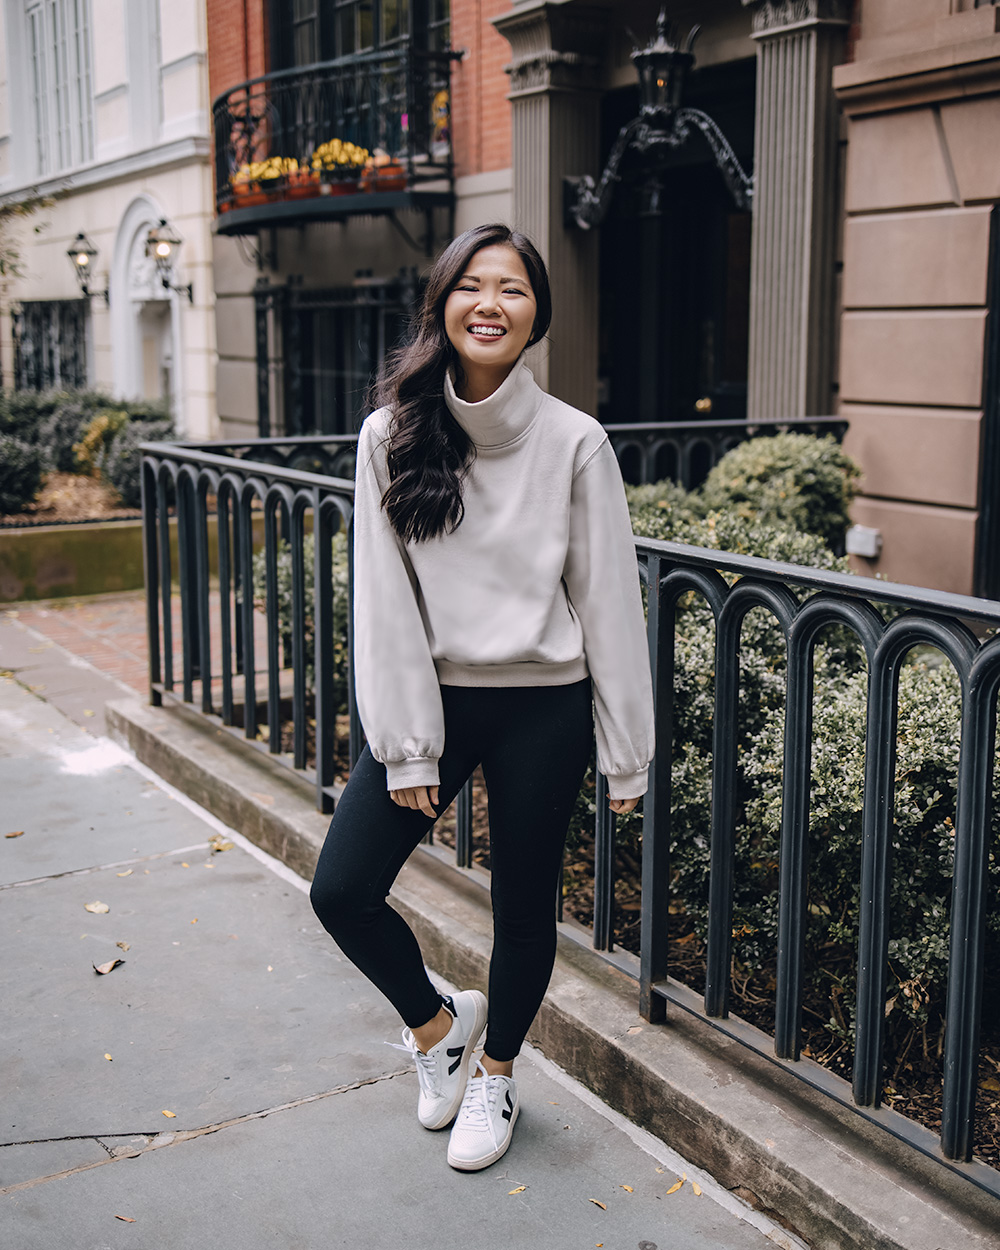 Grey Turtleneck with Black Leggings Outfits (7 ideas & outfits)